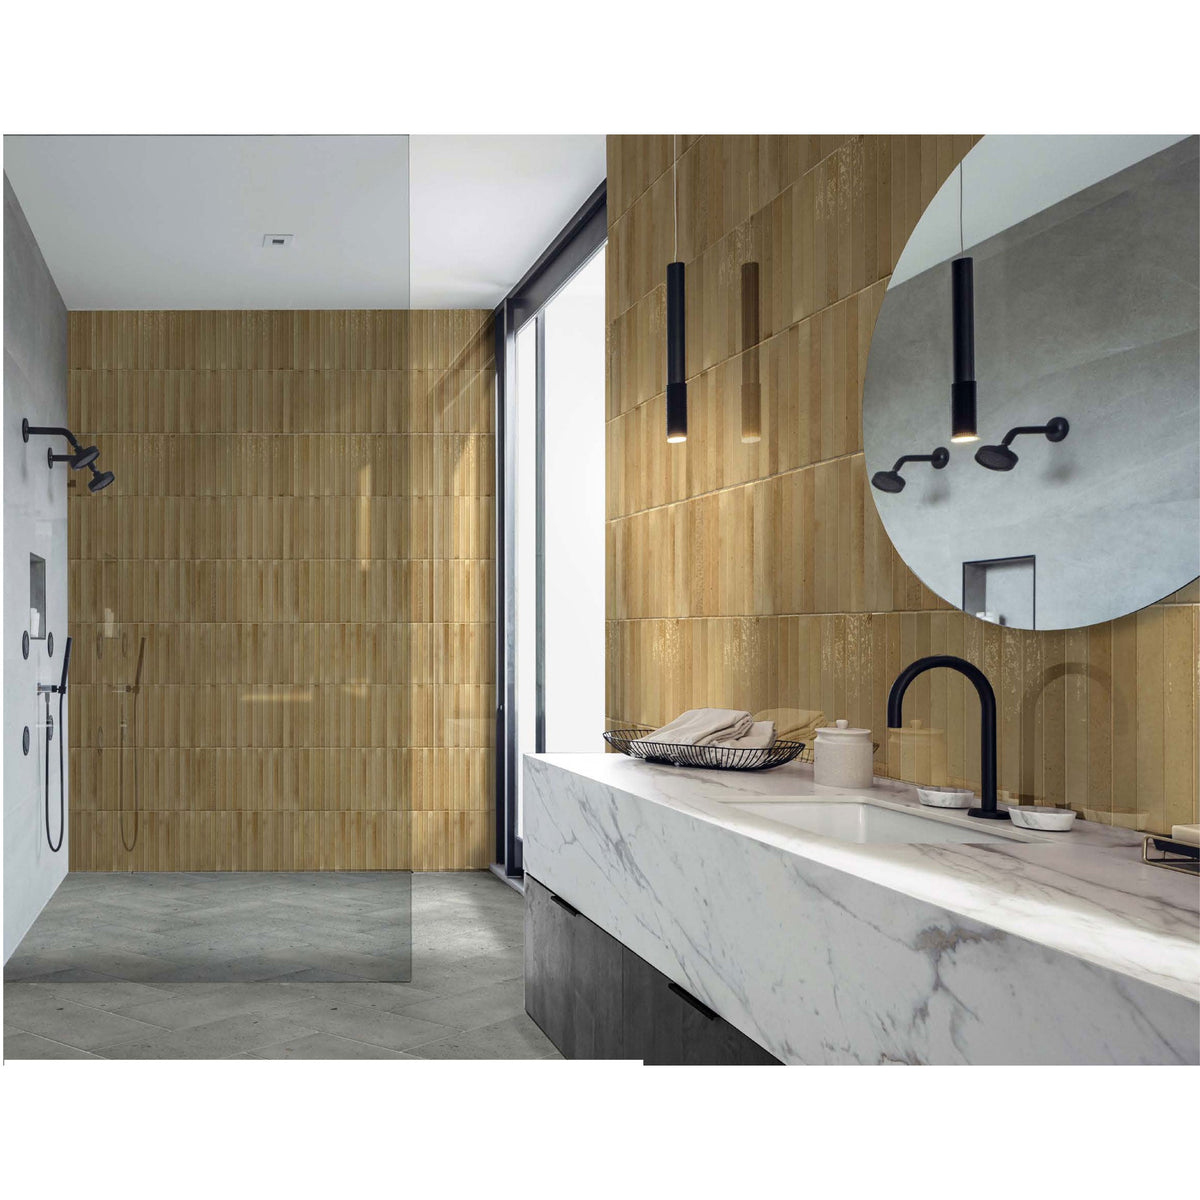 Cobsa - Homey Series 5 in. x 10 in. Porcelain Subway Tile - Curry Bathroom Install